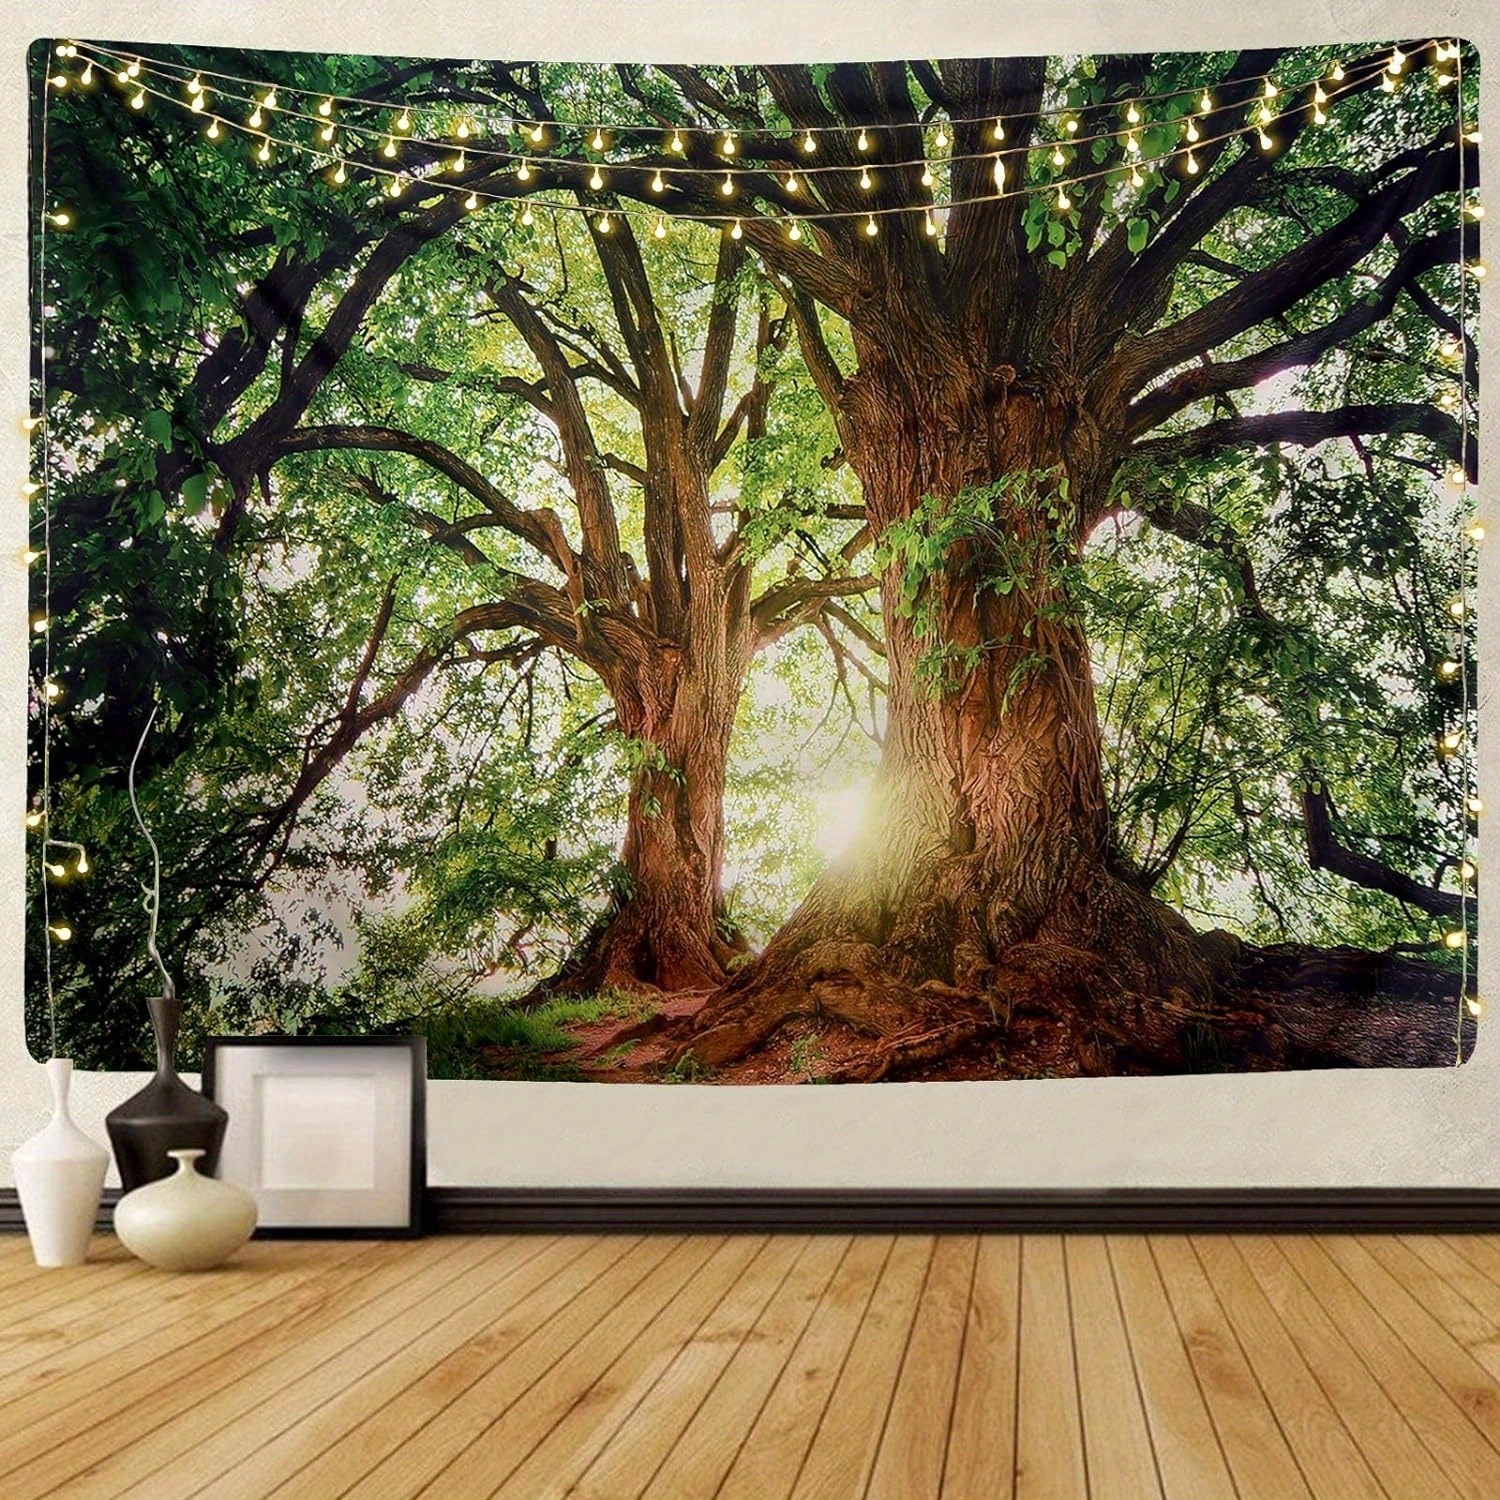 

Forest Tapestry Nature Tree Tapestries, Extra Large Oversized Tapestry Wall Hanging, Tapestry For Bedroom Living Room Backdrop, Indoor Outdoor Decoration Home Decor